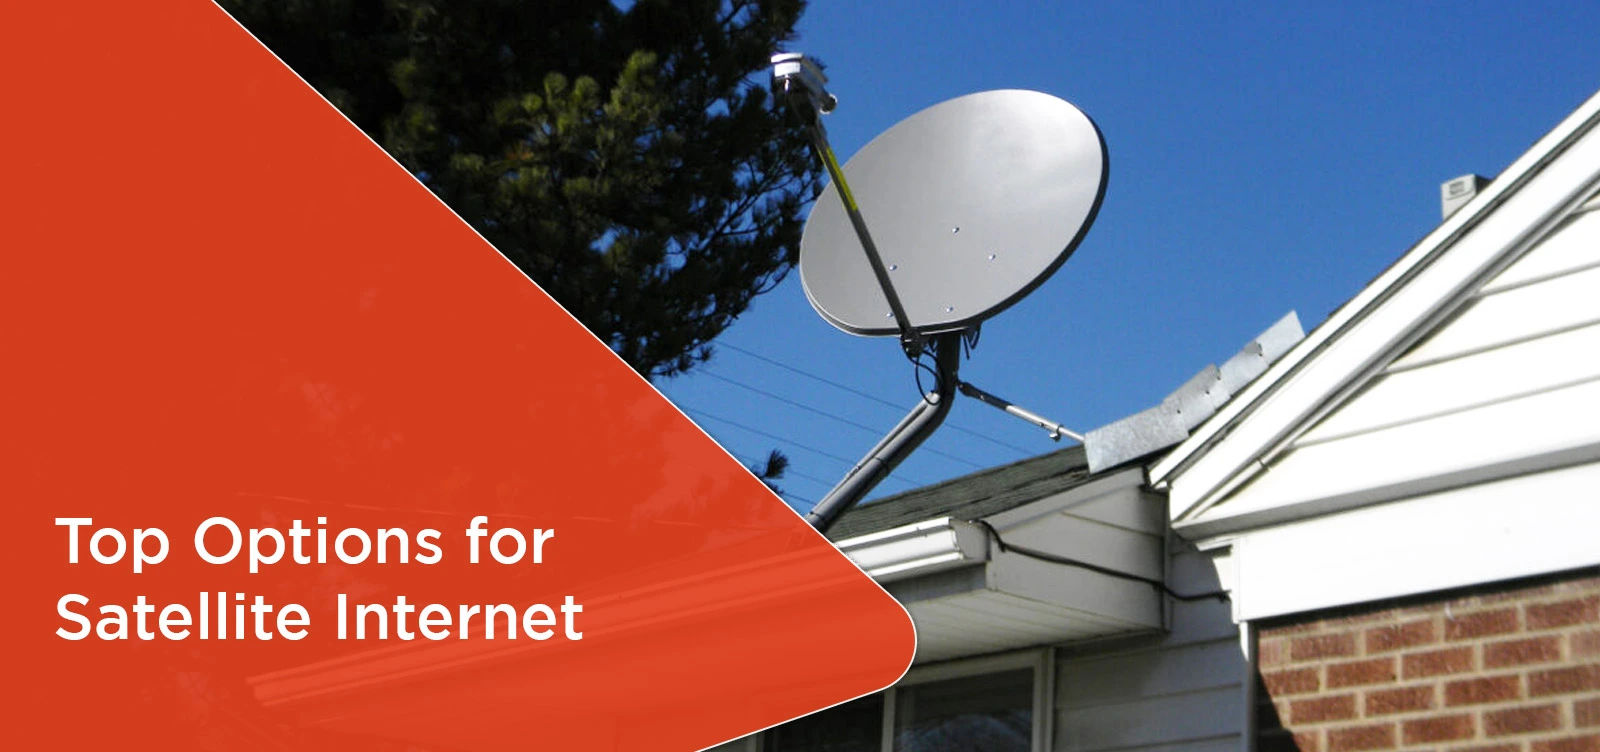 Top Options for Satellite Internet